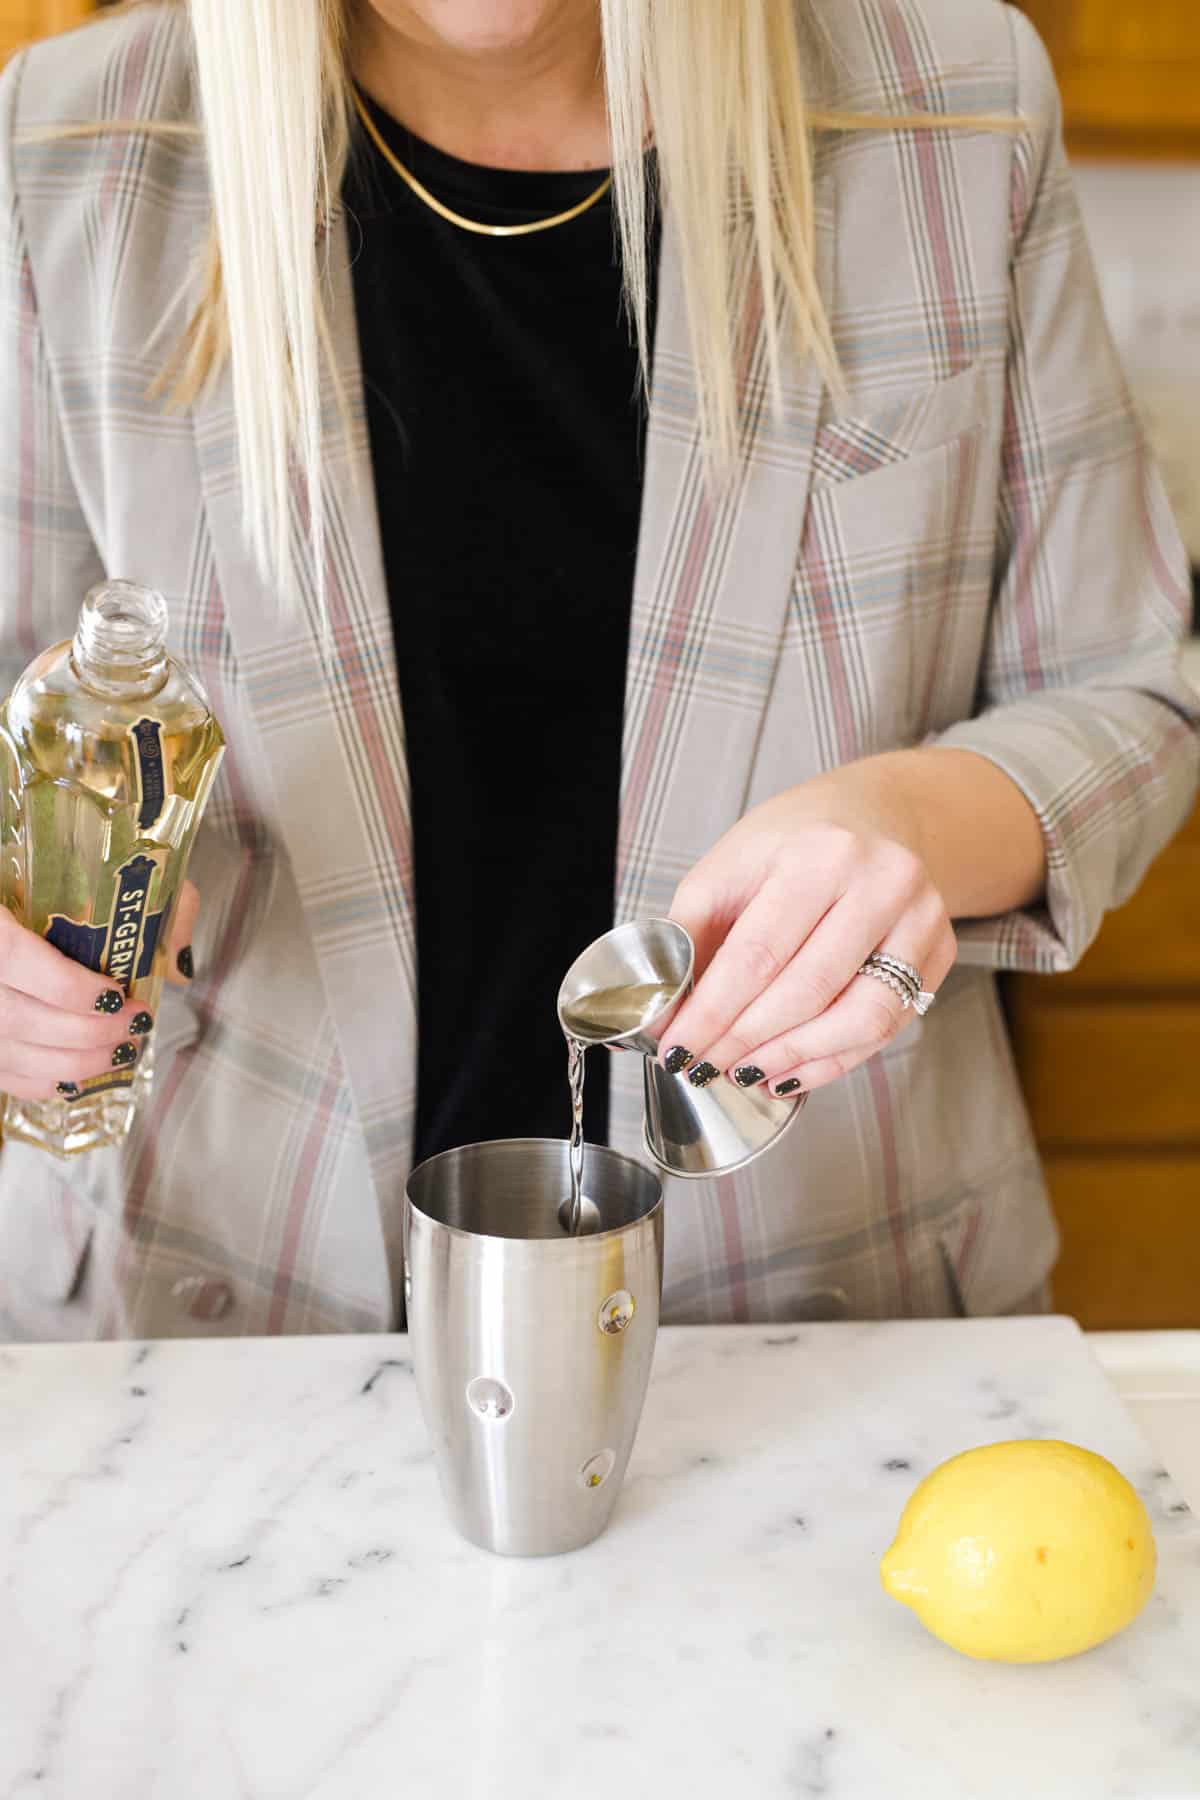 Woman adding St Germain to a cocktail shaker.